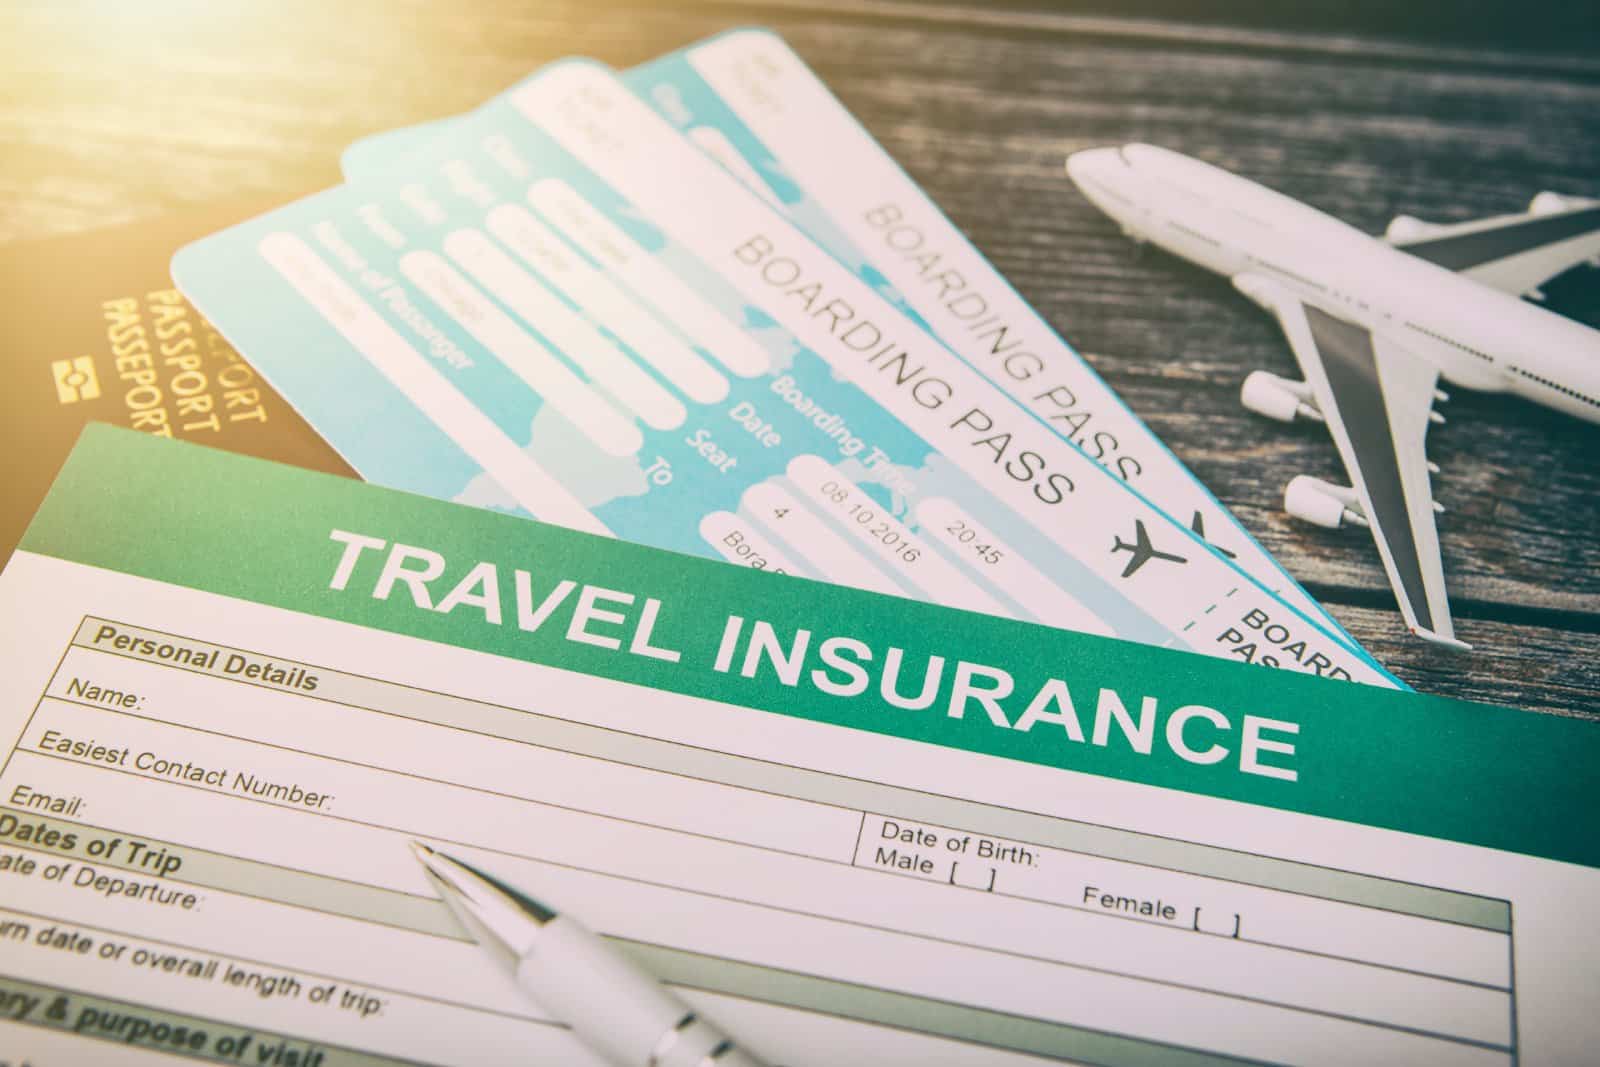 <p><span>Comprehensive travel insurance is a must for long-term travelers. Your policy should cover a broad range of scenarios, including medical emergencies, trip cancellations or interruptions, lost or stolen luggage, and emergency evacuations. Read the policy details carefully to understand what is and isn’t covered, and make sure the coverage limits are adequate for your needs.</span></p> <p><span>Choosing a policy that offers flexibility in case your travel plans change is also wise. Store a digital copy of your insurance policy in an easily accessible online location, and carry a physical copy as a backup.</span></p> <p><b>Insider’s Tip: </b><span>Choose a policy that allows for extensions if you decide to prolong your travel.</span></p>